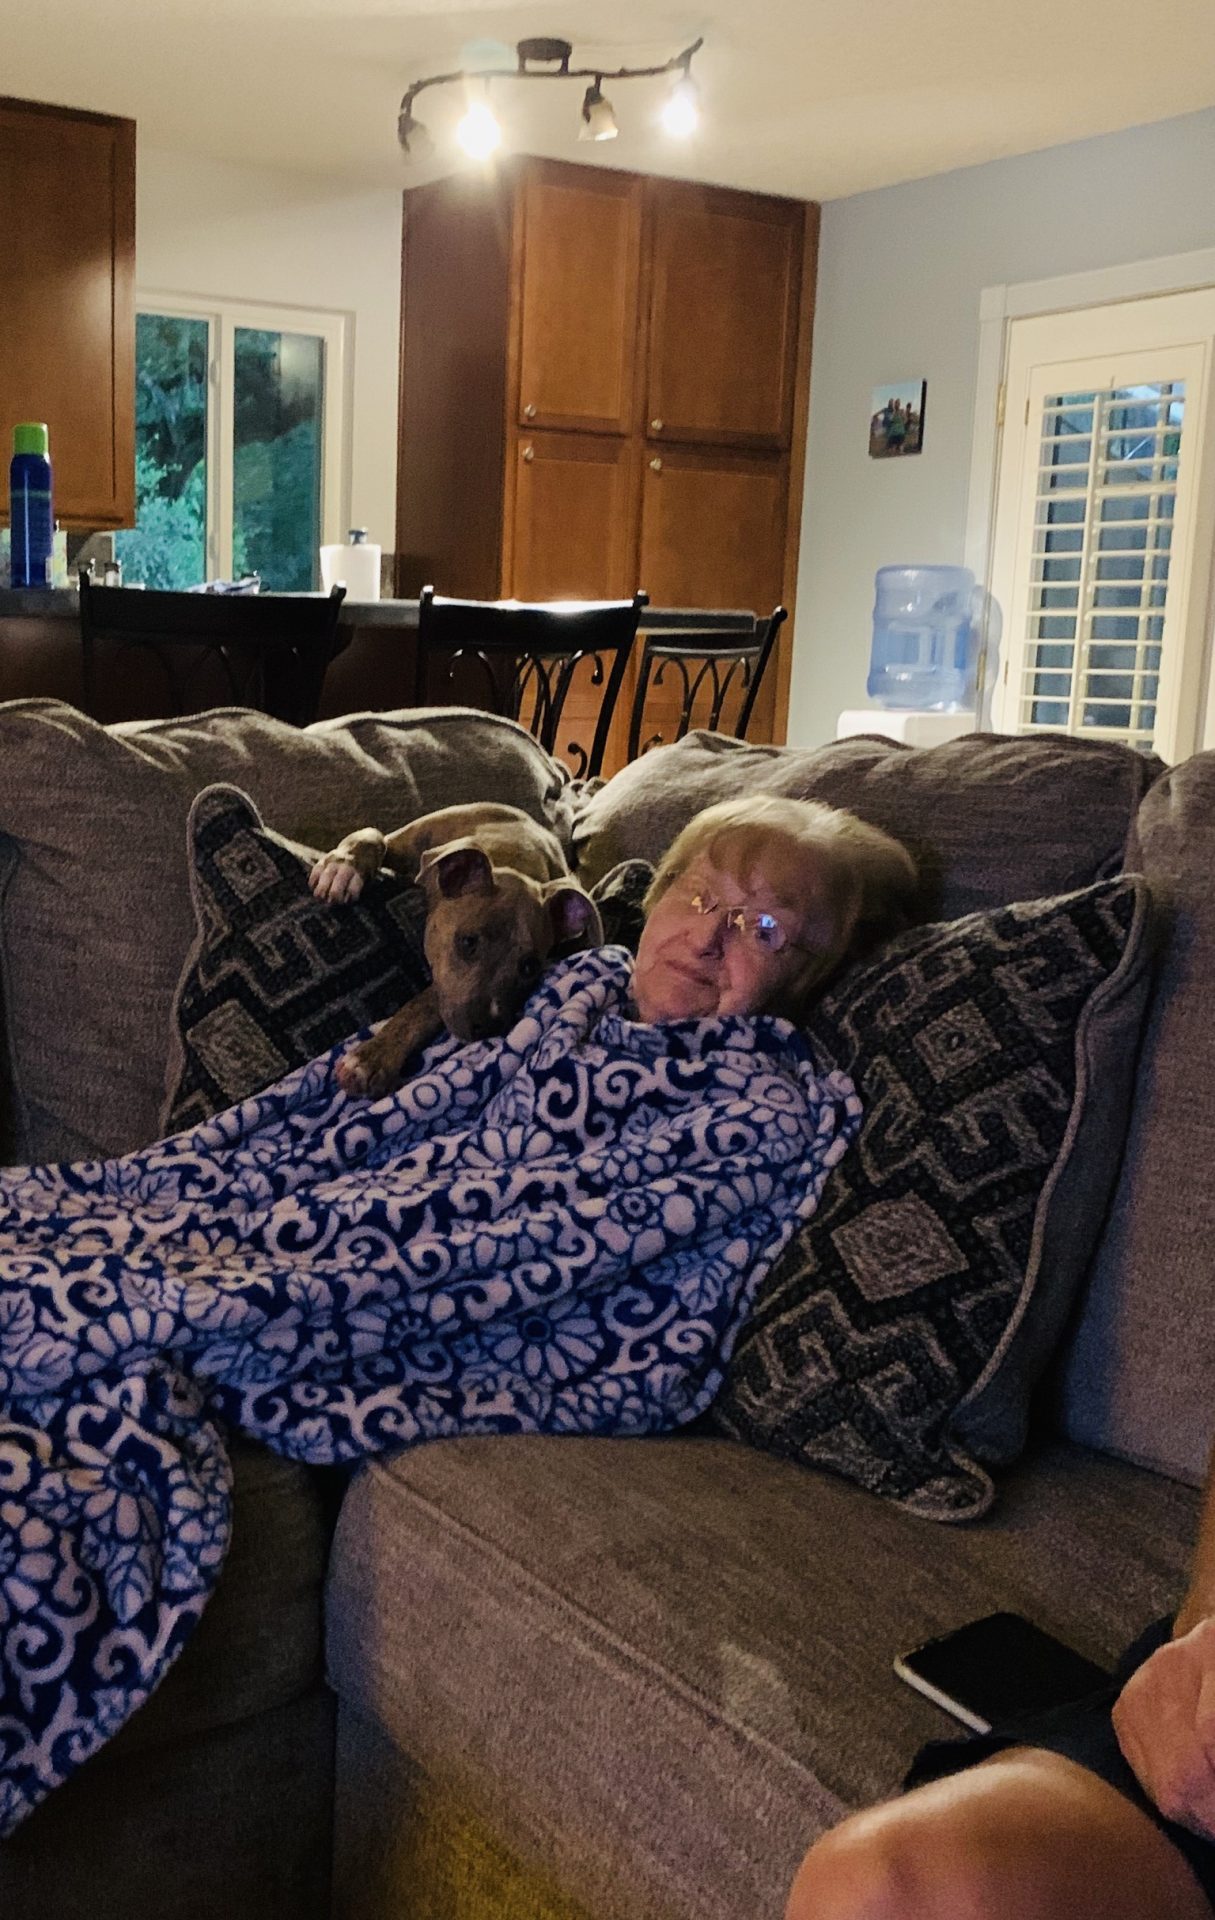 Willow loved hanging with grandma